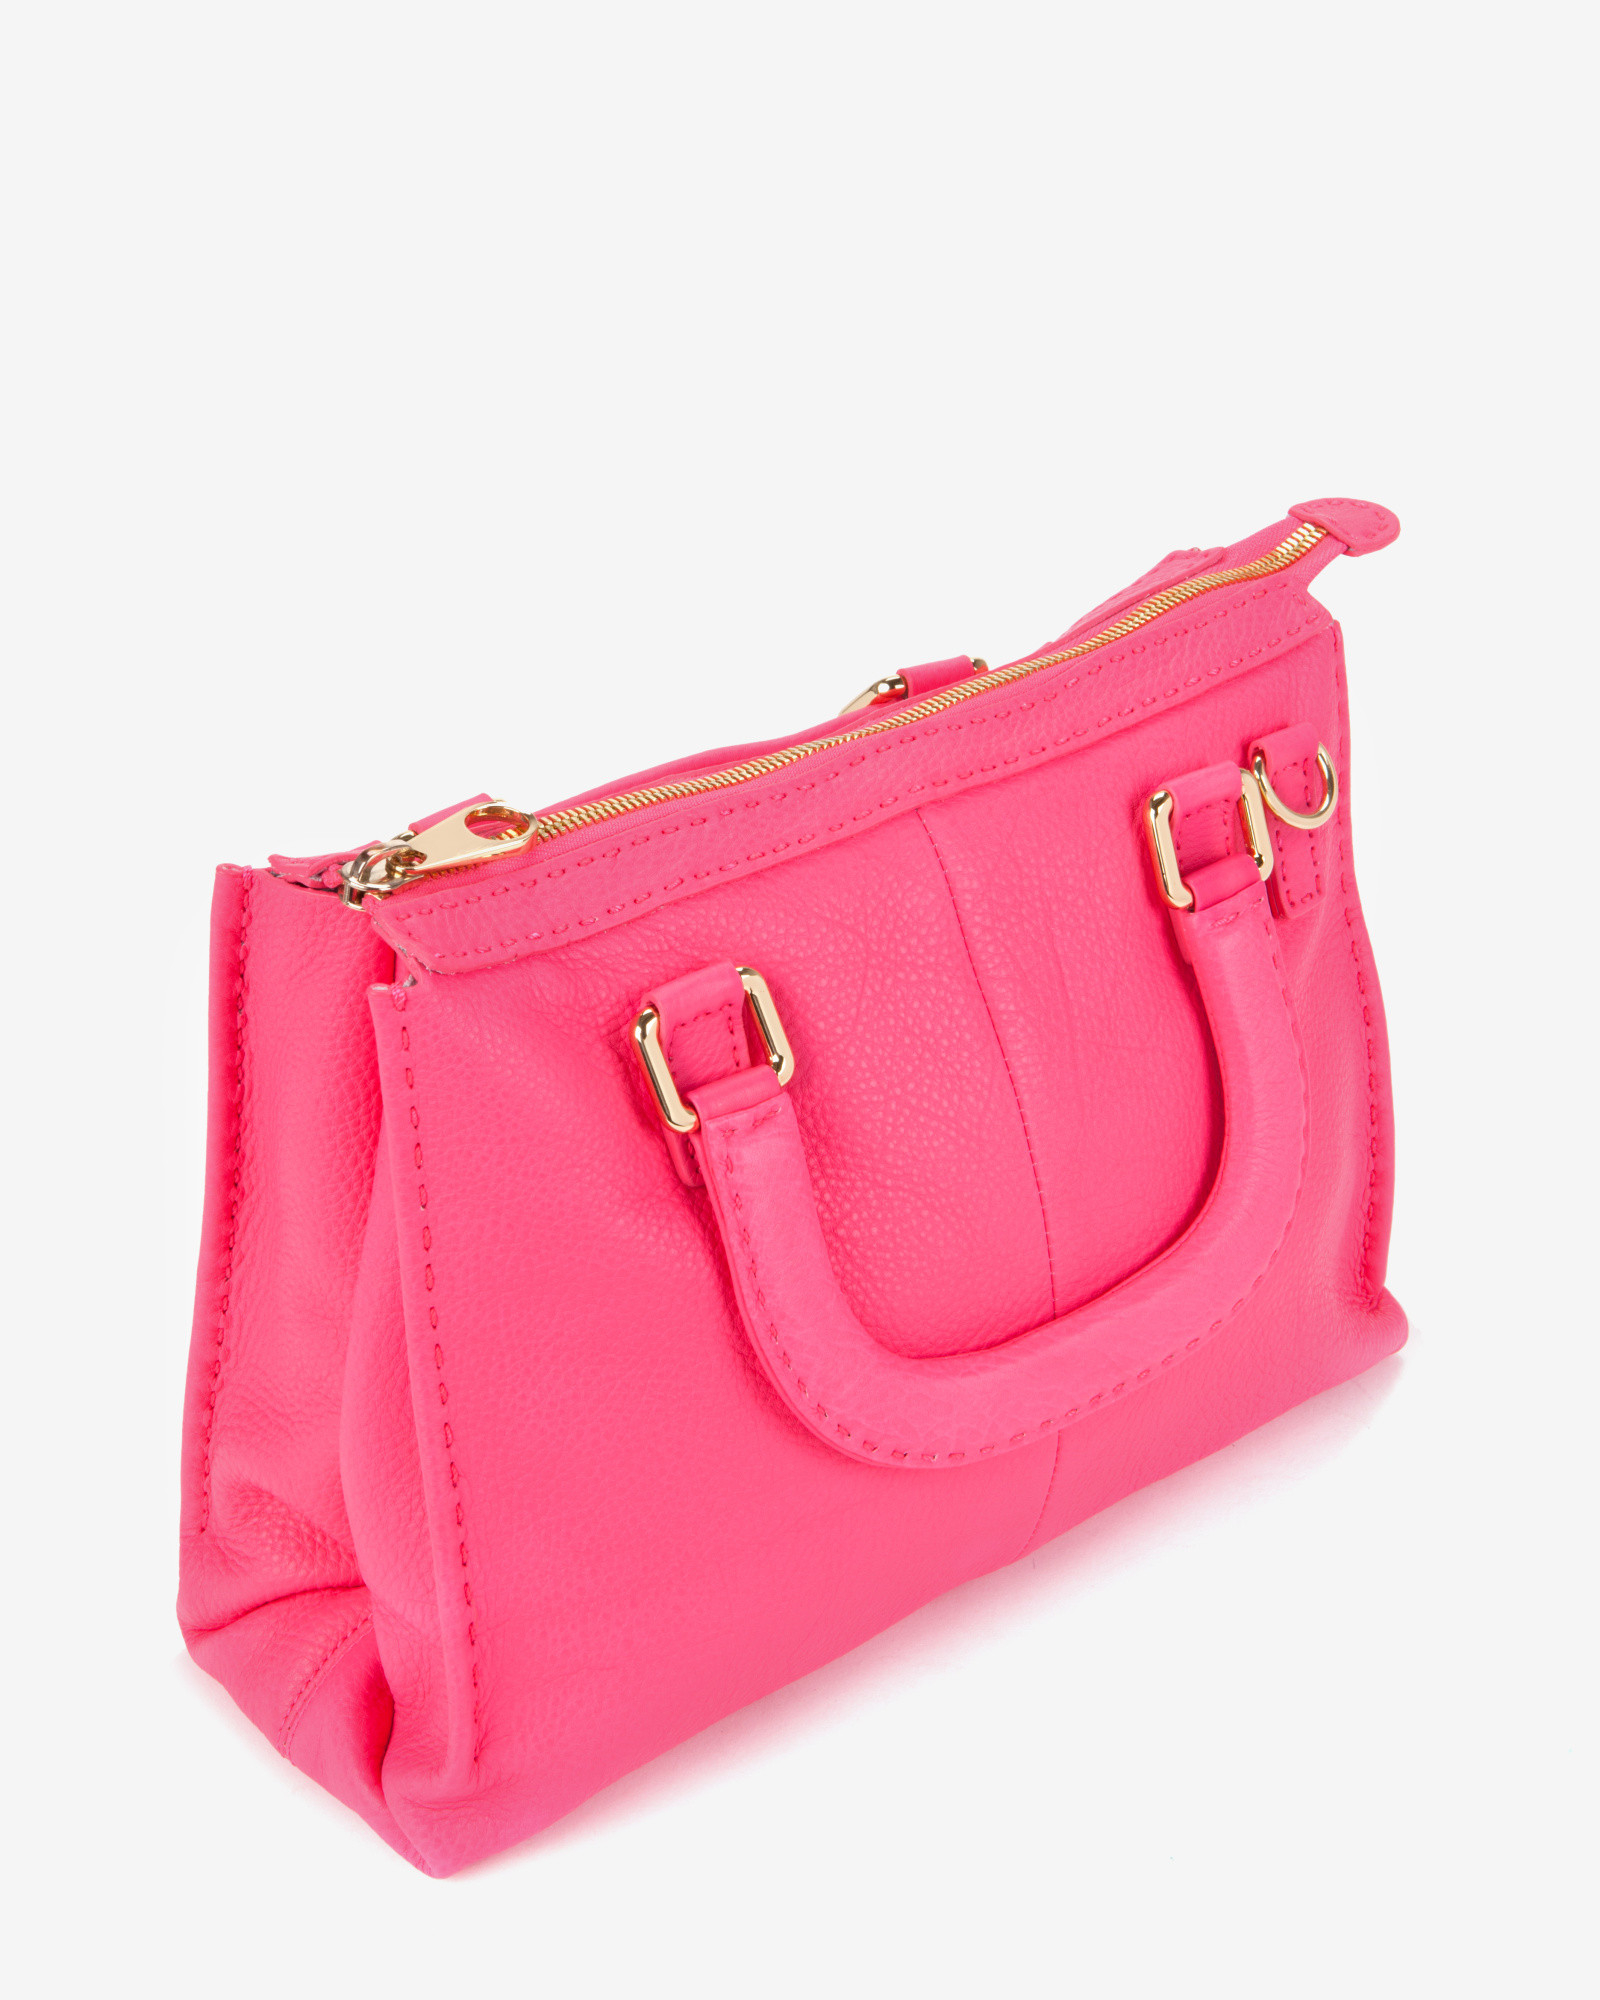 Lyst - Ted Baker Stab Stitch Bag in Pink